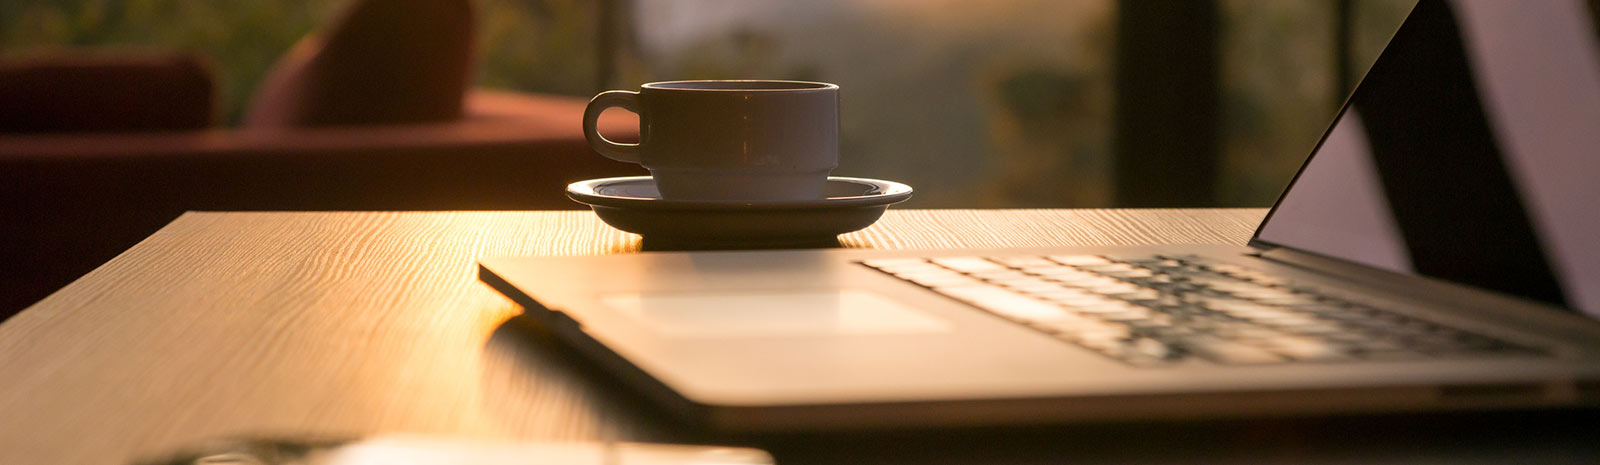 Coffee cup next to a laptop